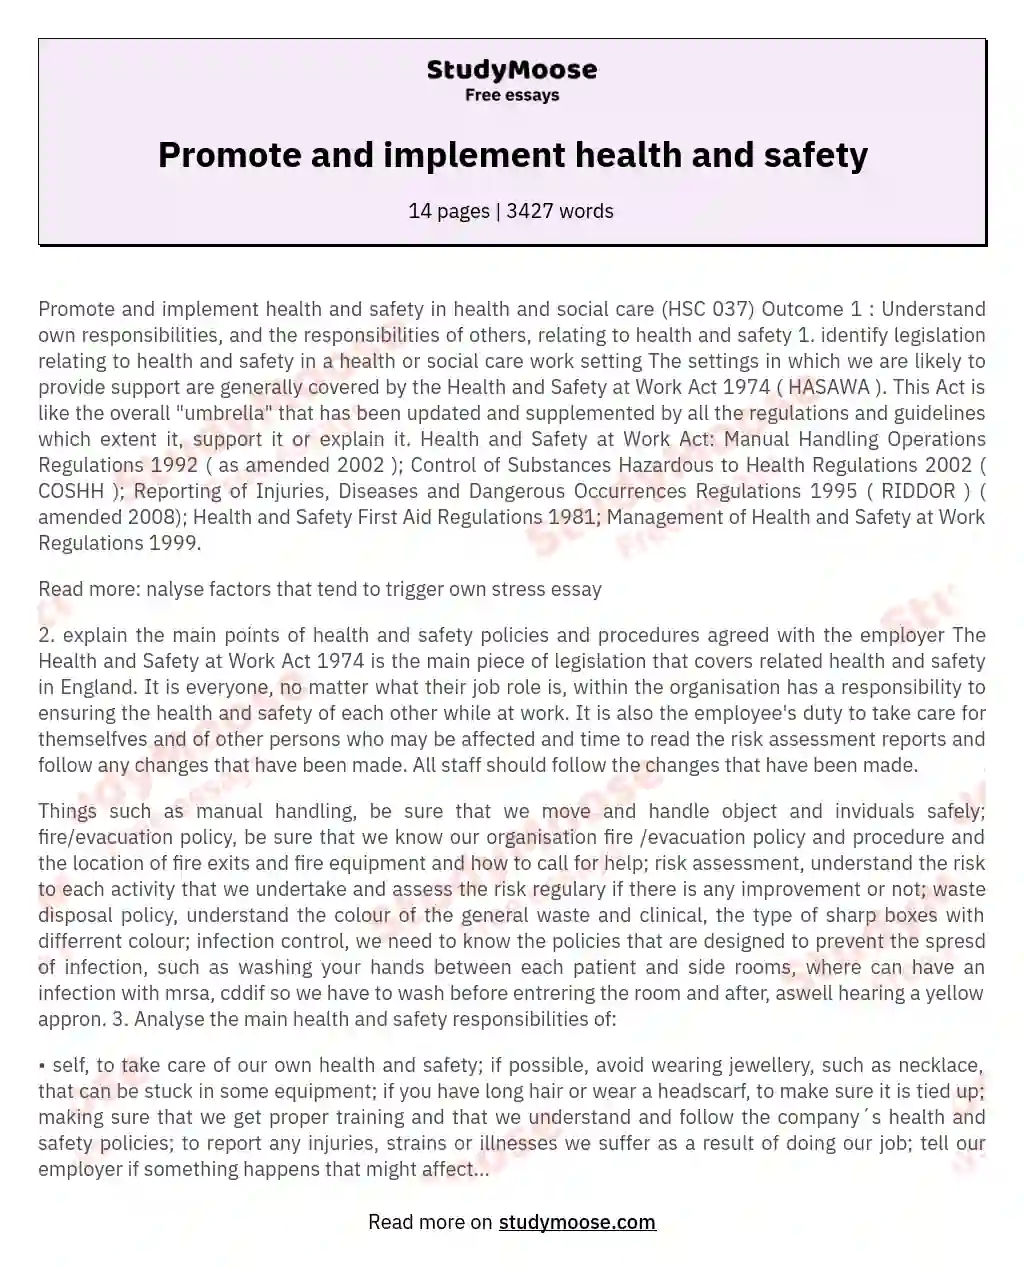 Understanding Health and Safety Responsibilities in HSC 037 essay